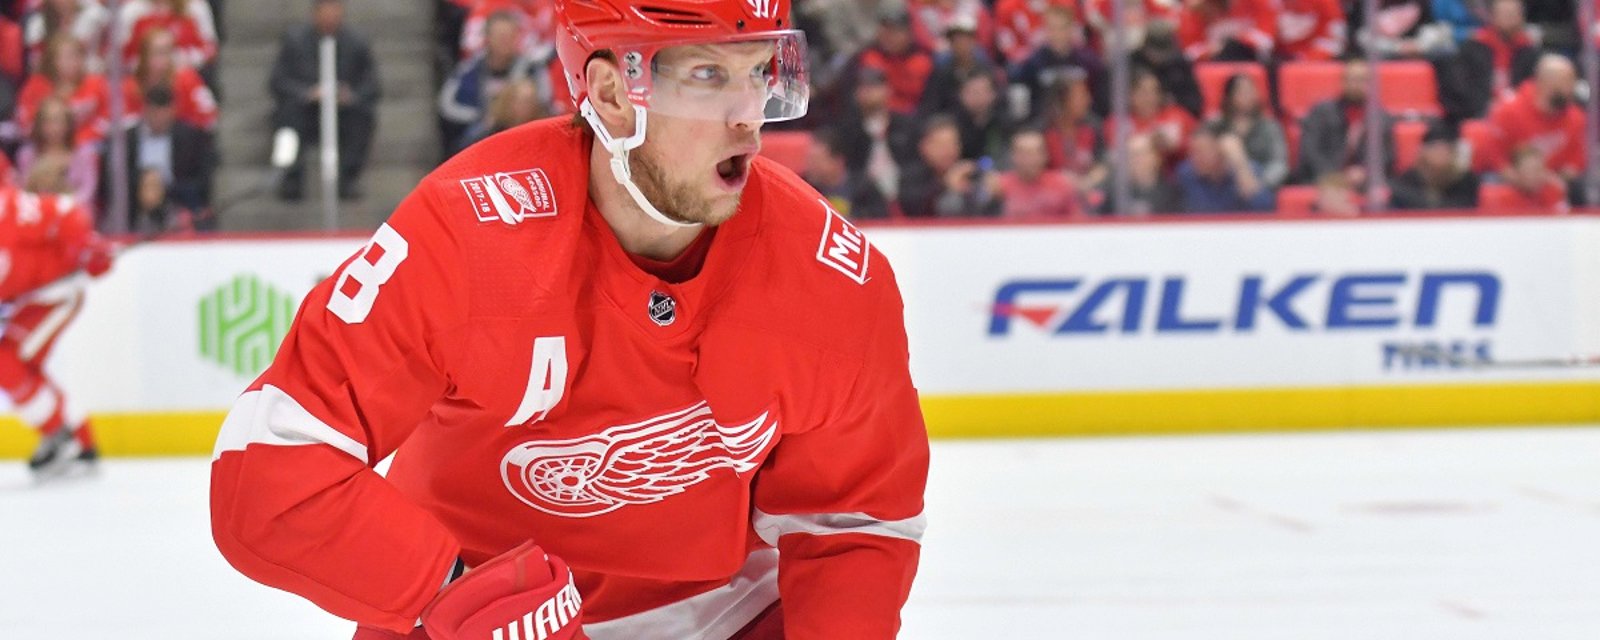 Abdelkader sends a heartfelt message to the Red Wings and their fans.